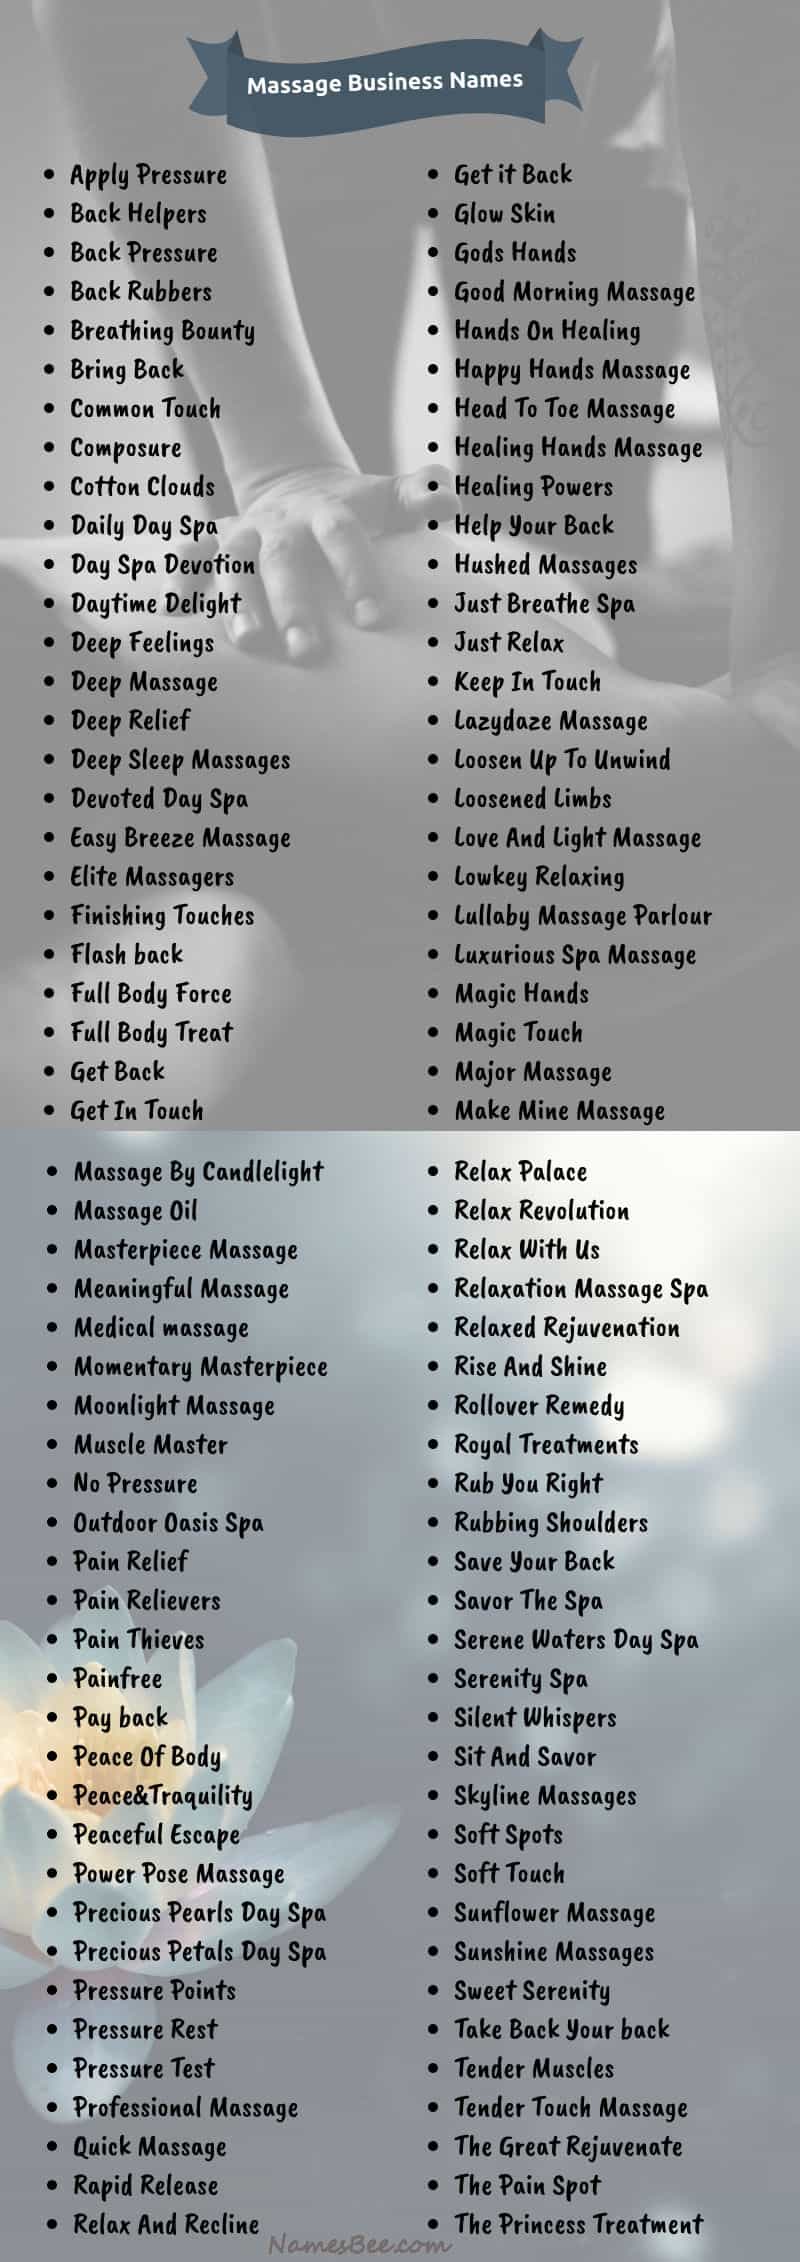 massage therapy business names